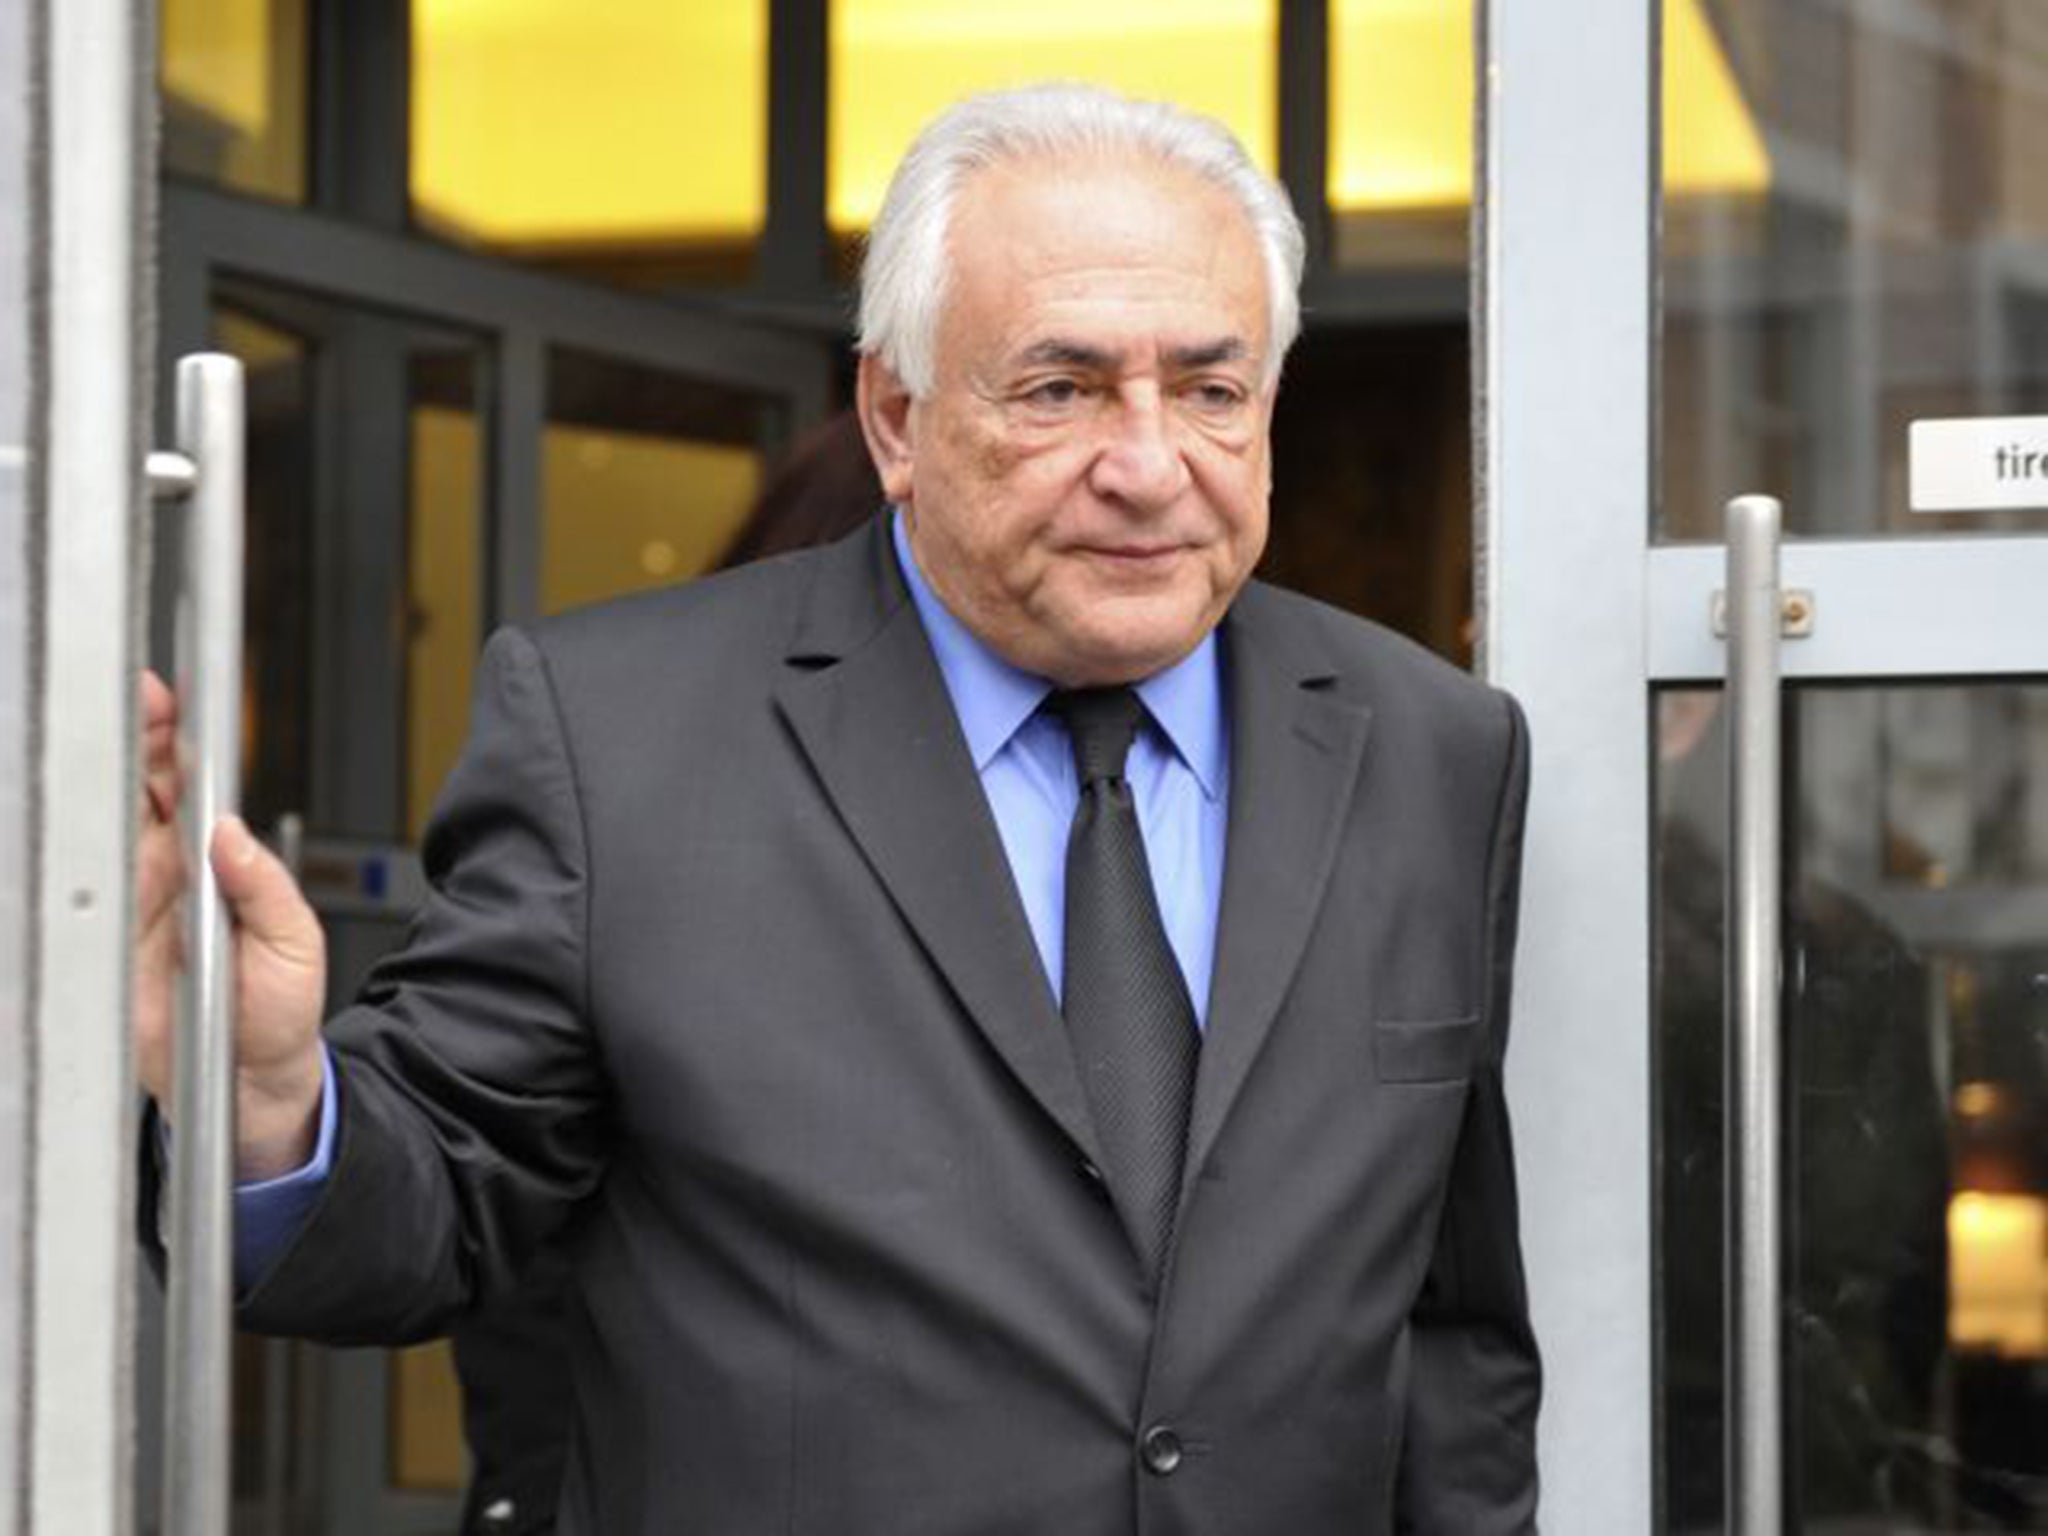 Dominique Strauss-Kahn faces up to 10 years in prison and 1.5 million euros (?977m) in fines if he is convicted